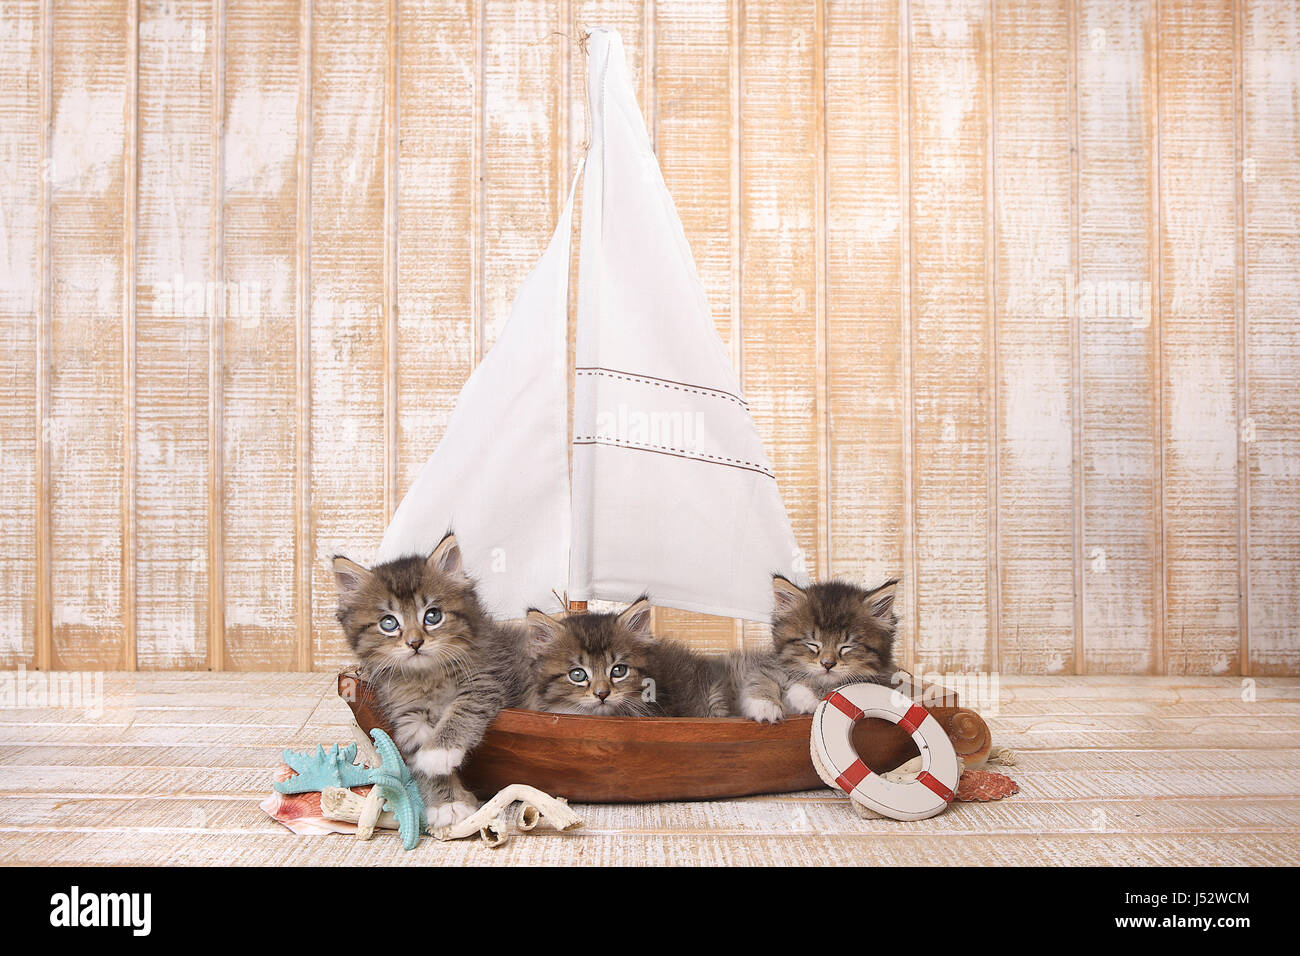 Little Cute Kittens in a Sailboat With Ocean Theme Stock Photo